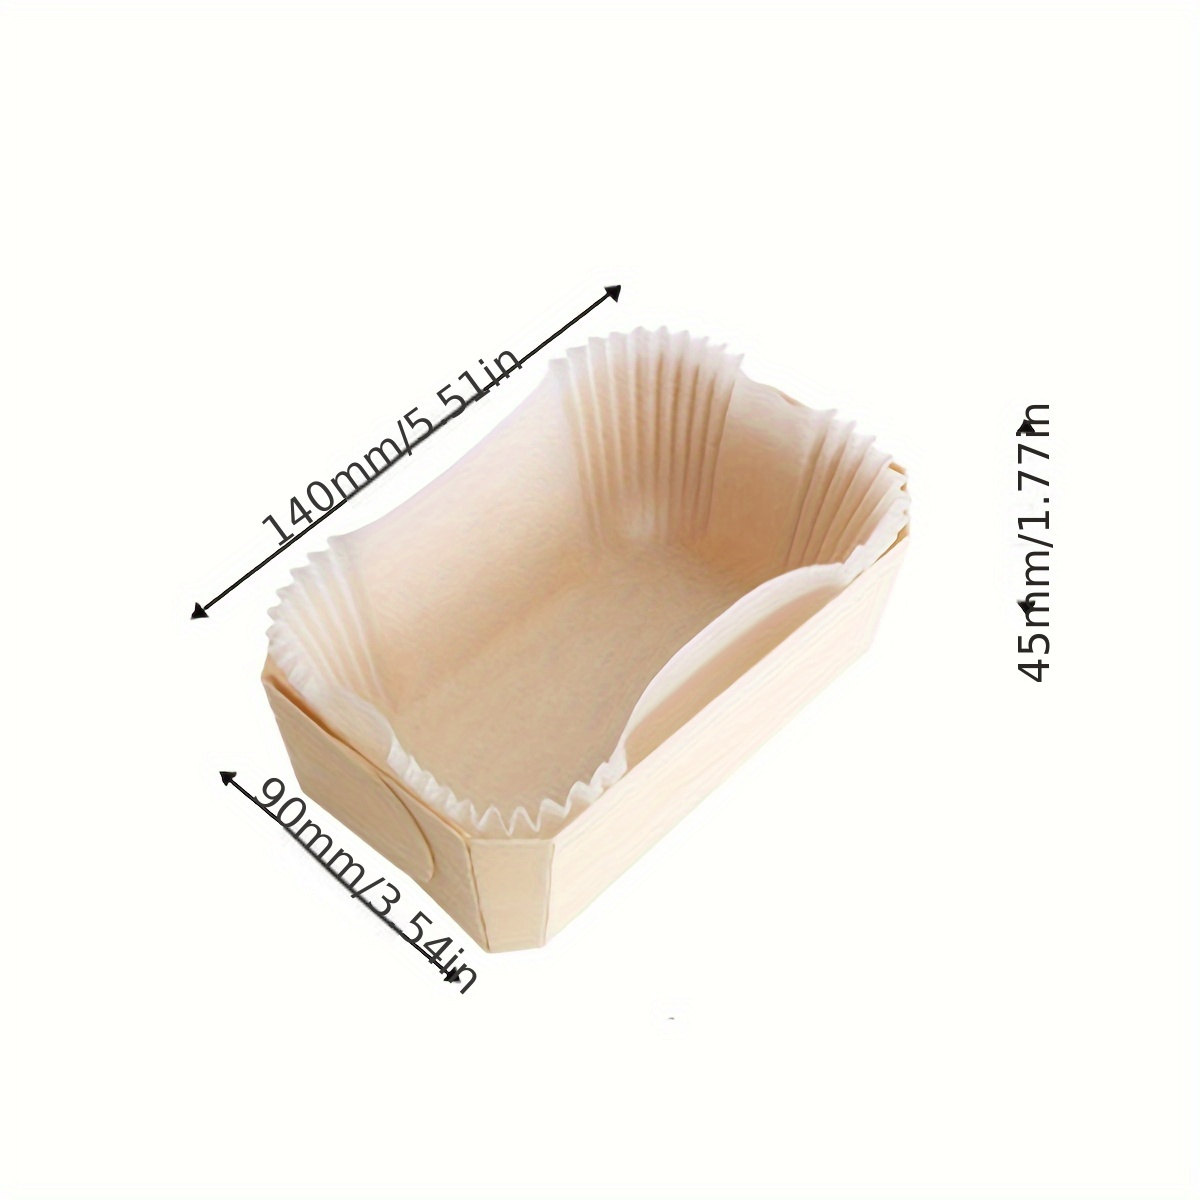 Wooden Baking Molds, Disposable Baking Molds